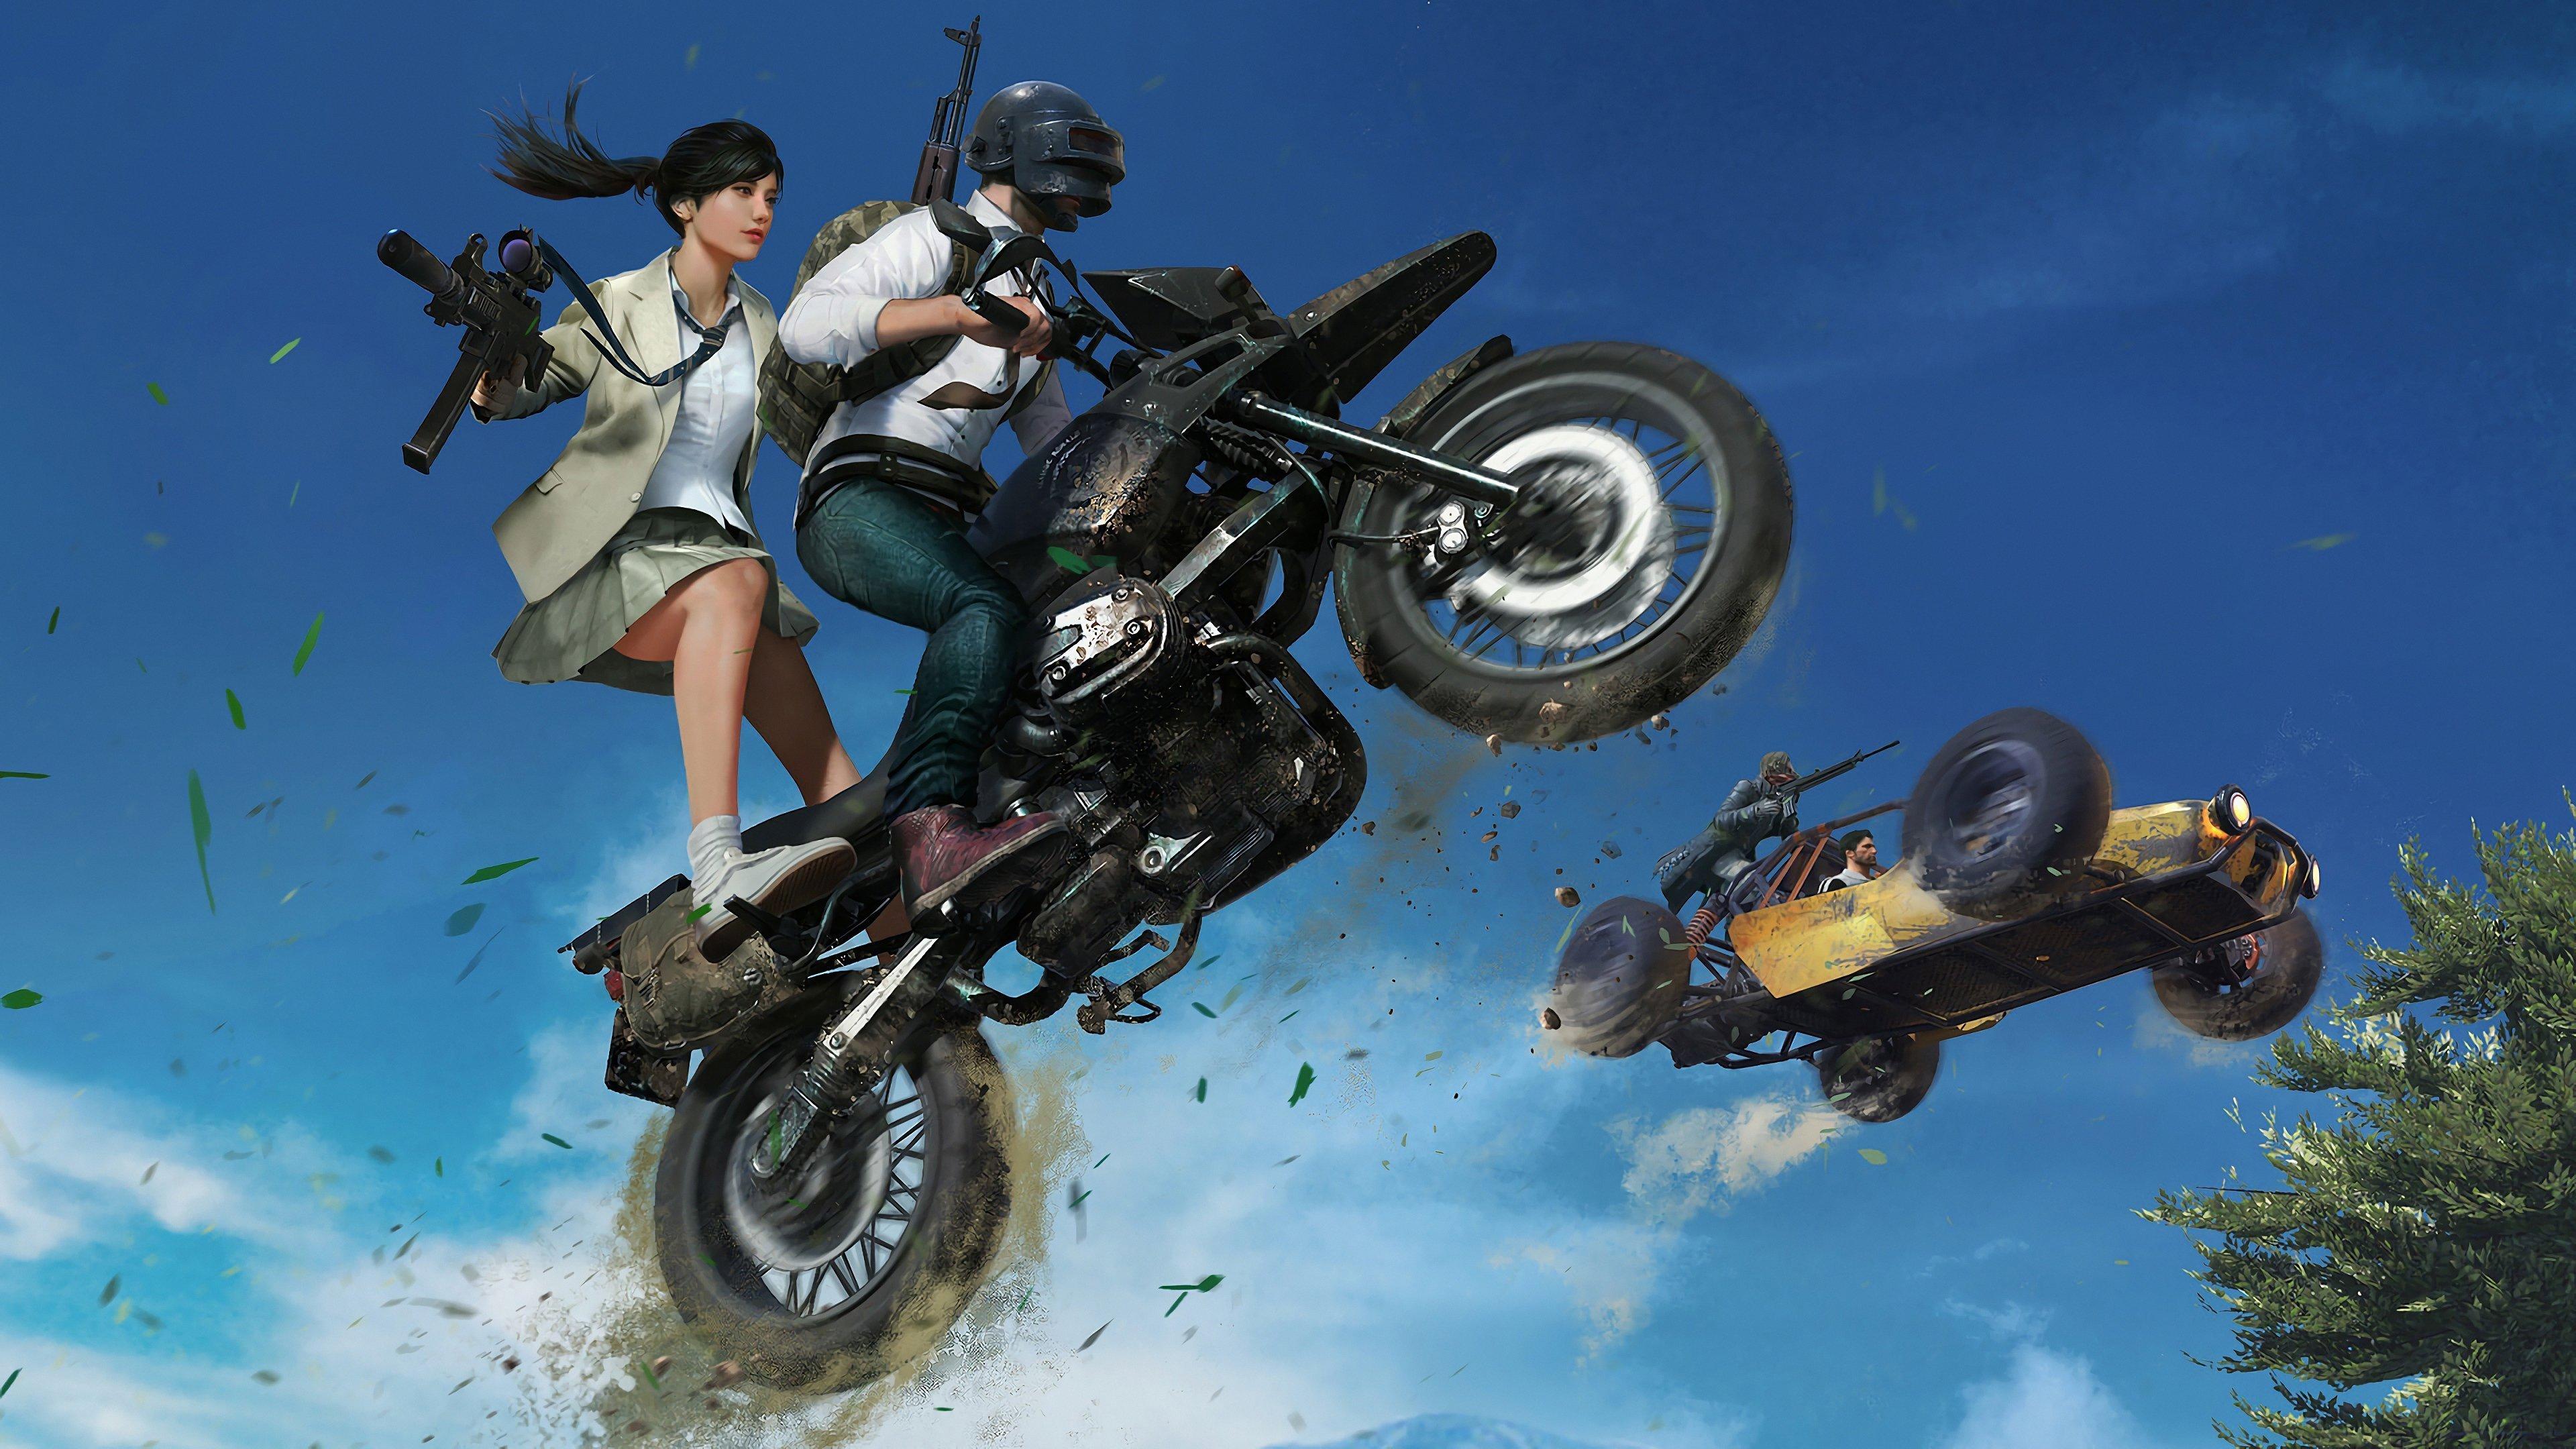 PUBG player on bike with girl friend with guns wallpaper